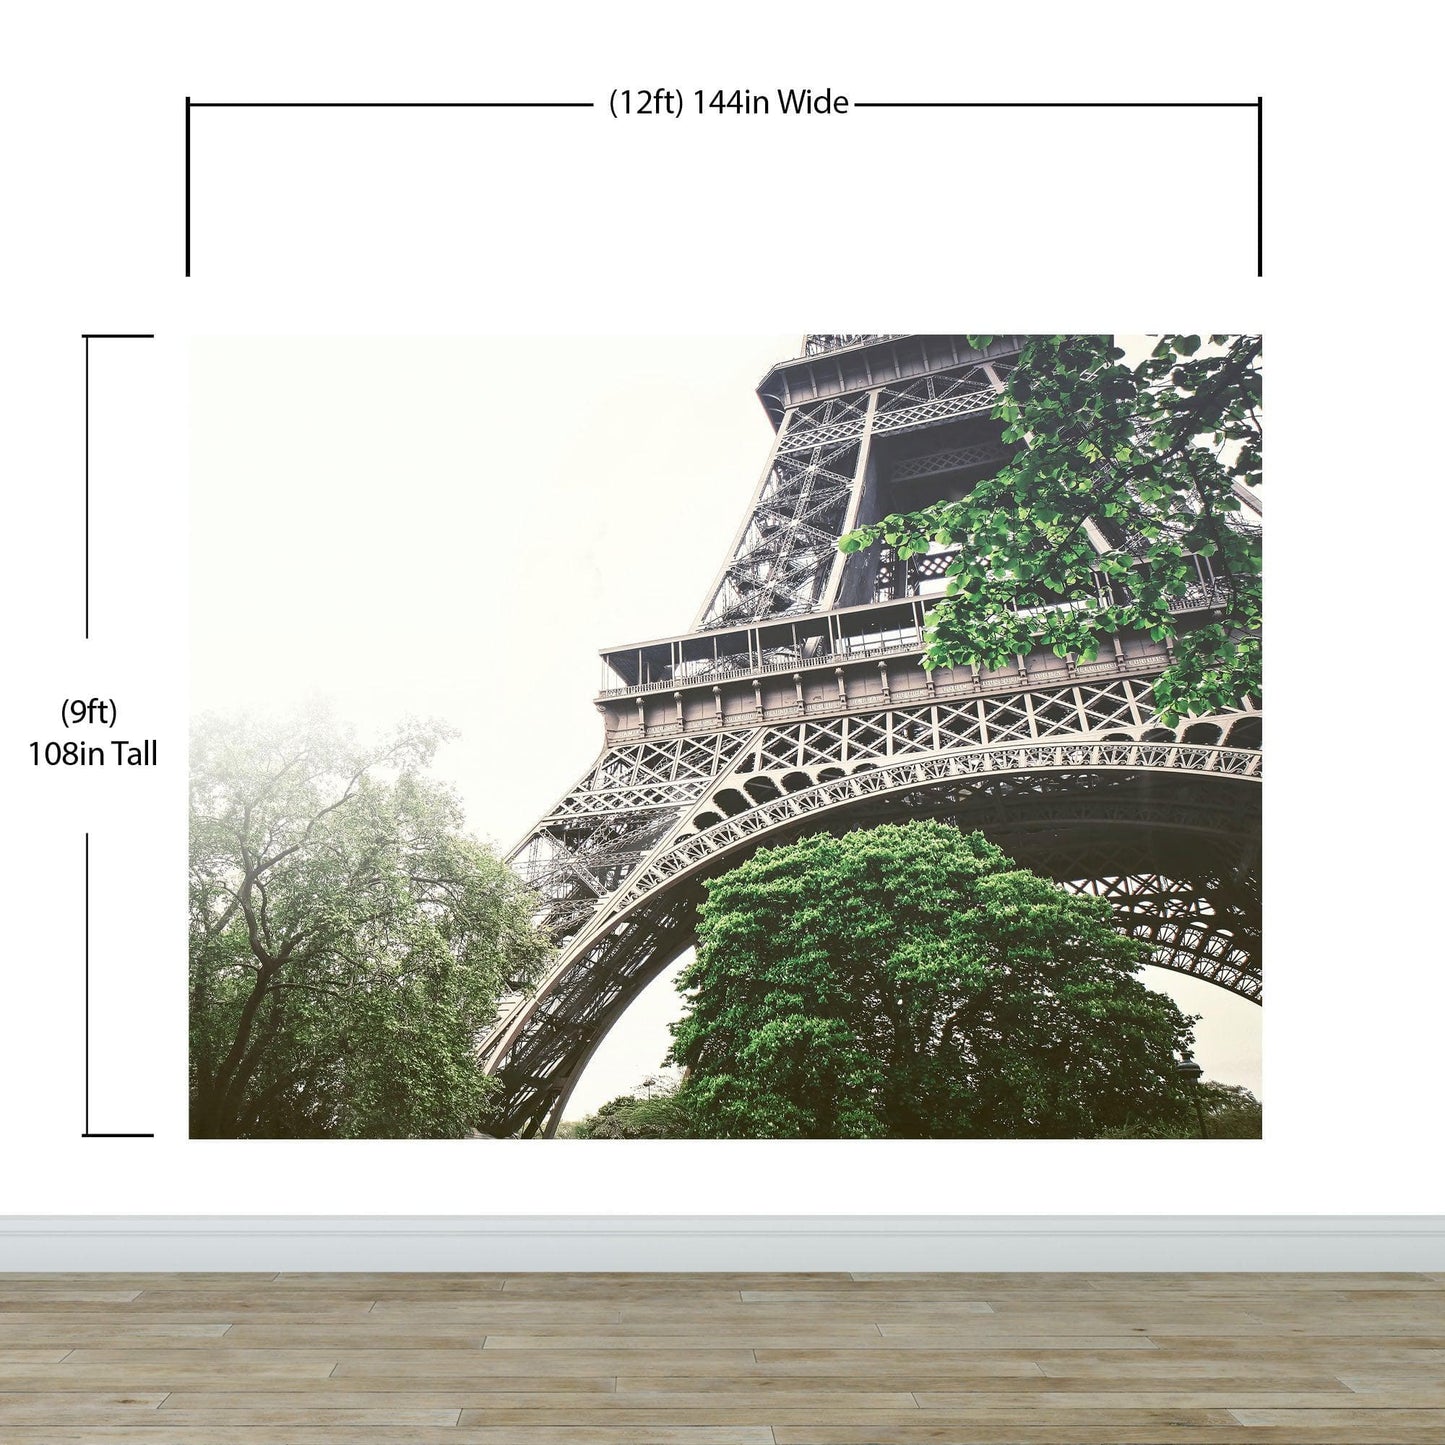 Eiffel Tower Wallpaper Mural Peel and Stick. Low Angle View of Eiffel Tower / Paris France / European Vintage Style Decor. #6427